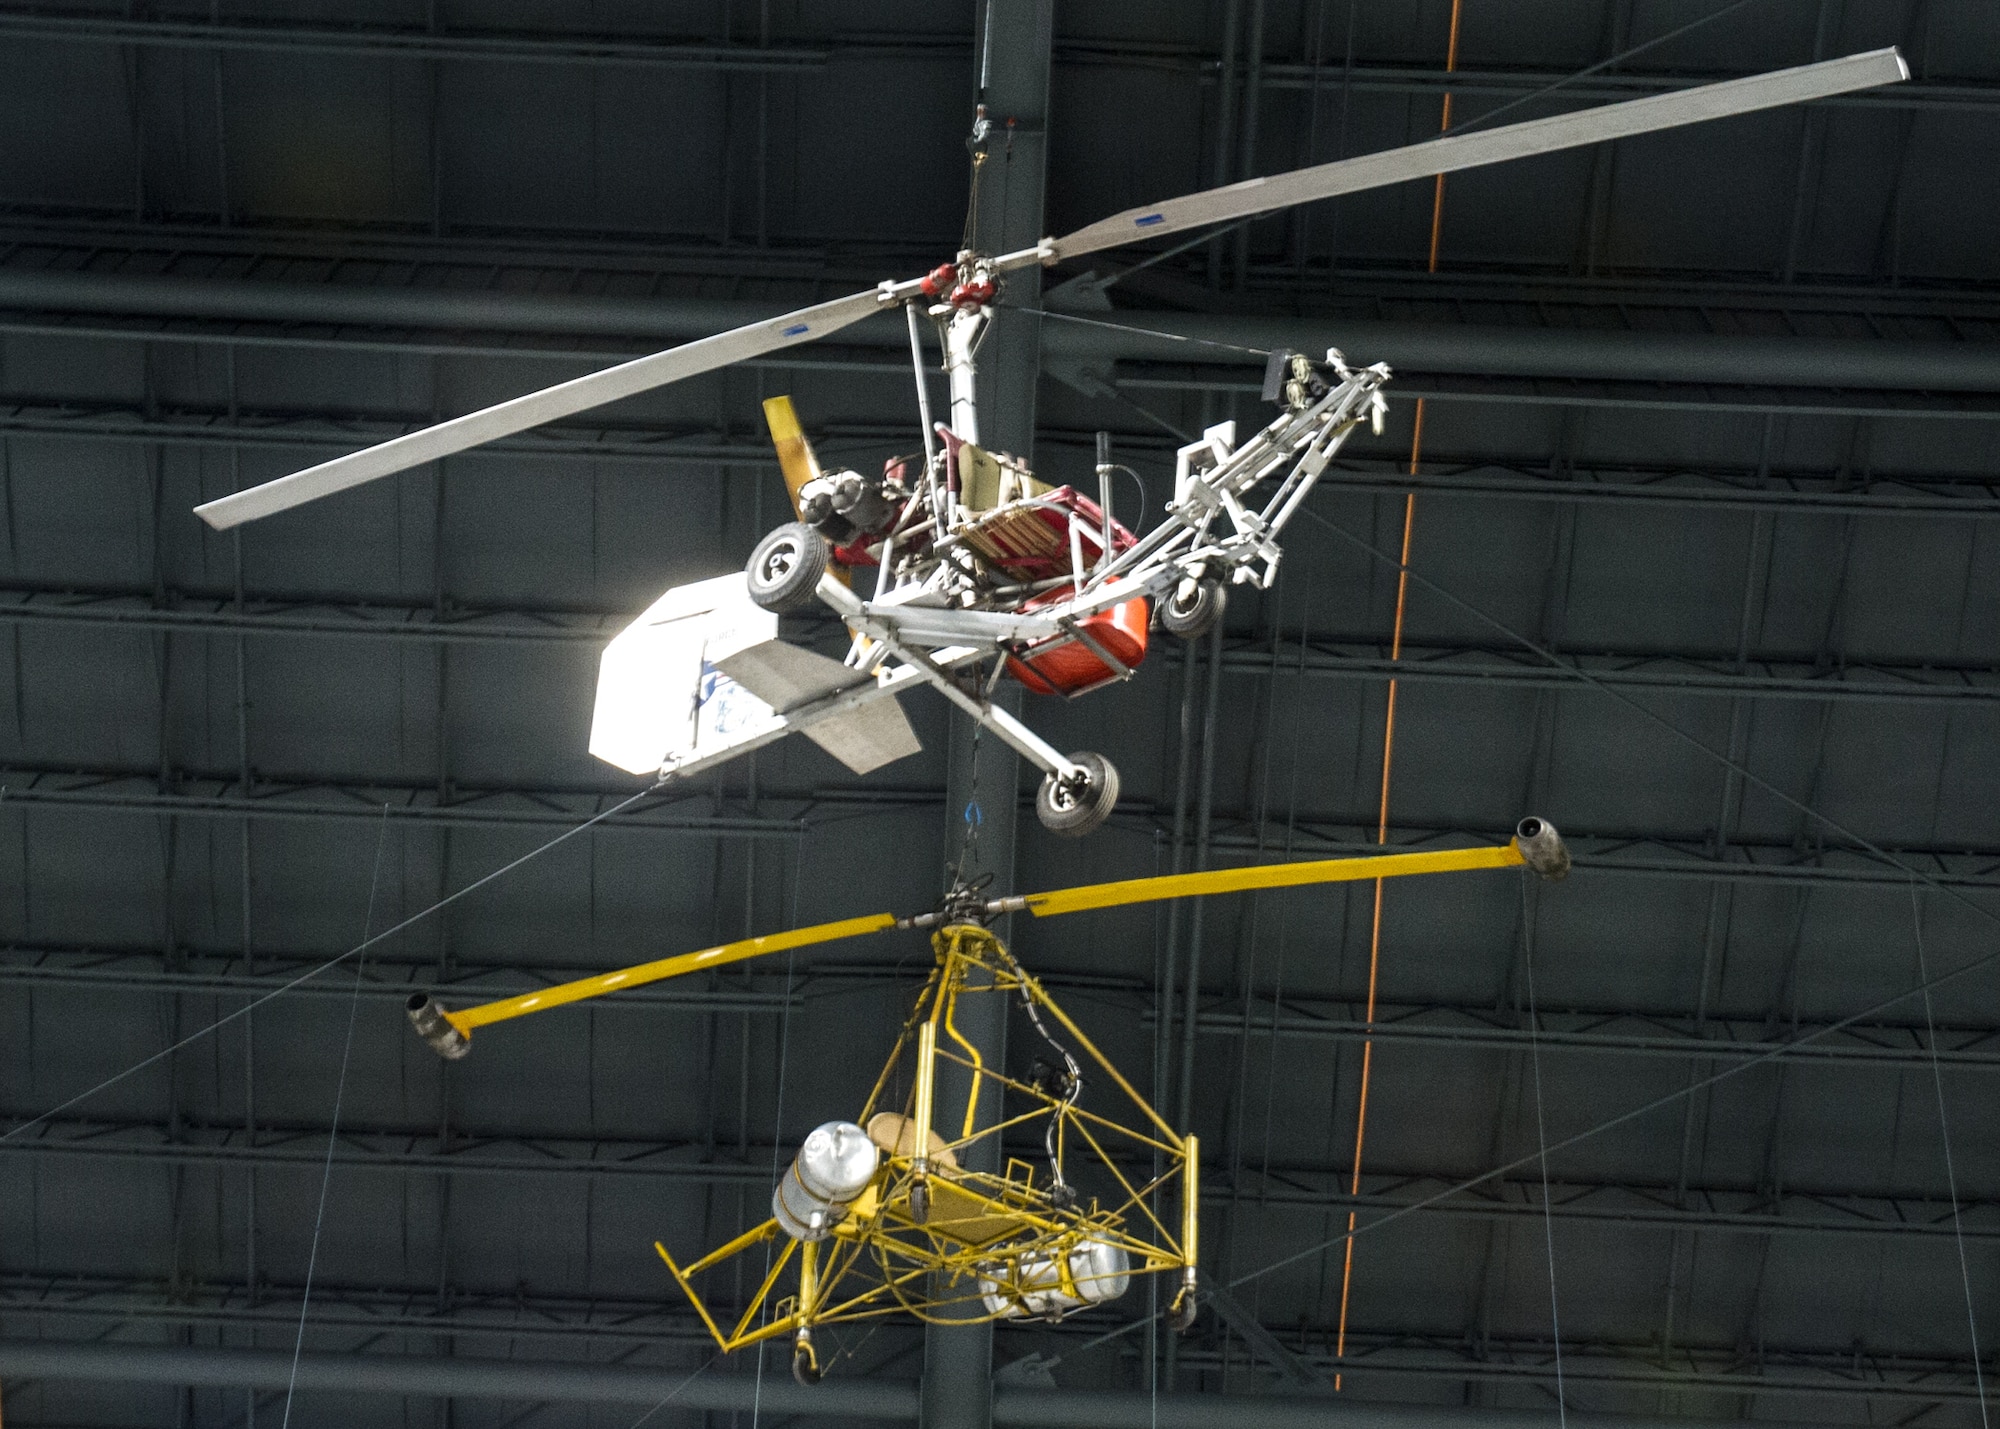 Bensen X-25A Gyrocopter(front) and McDonnell XH-20 Little Henry(rear) in the Research & Development Gallery at the National Museum of the U.S. Air Force on December 28, 2015. (U.S. Air Force photo)